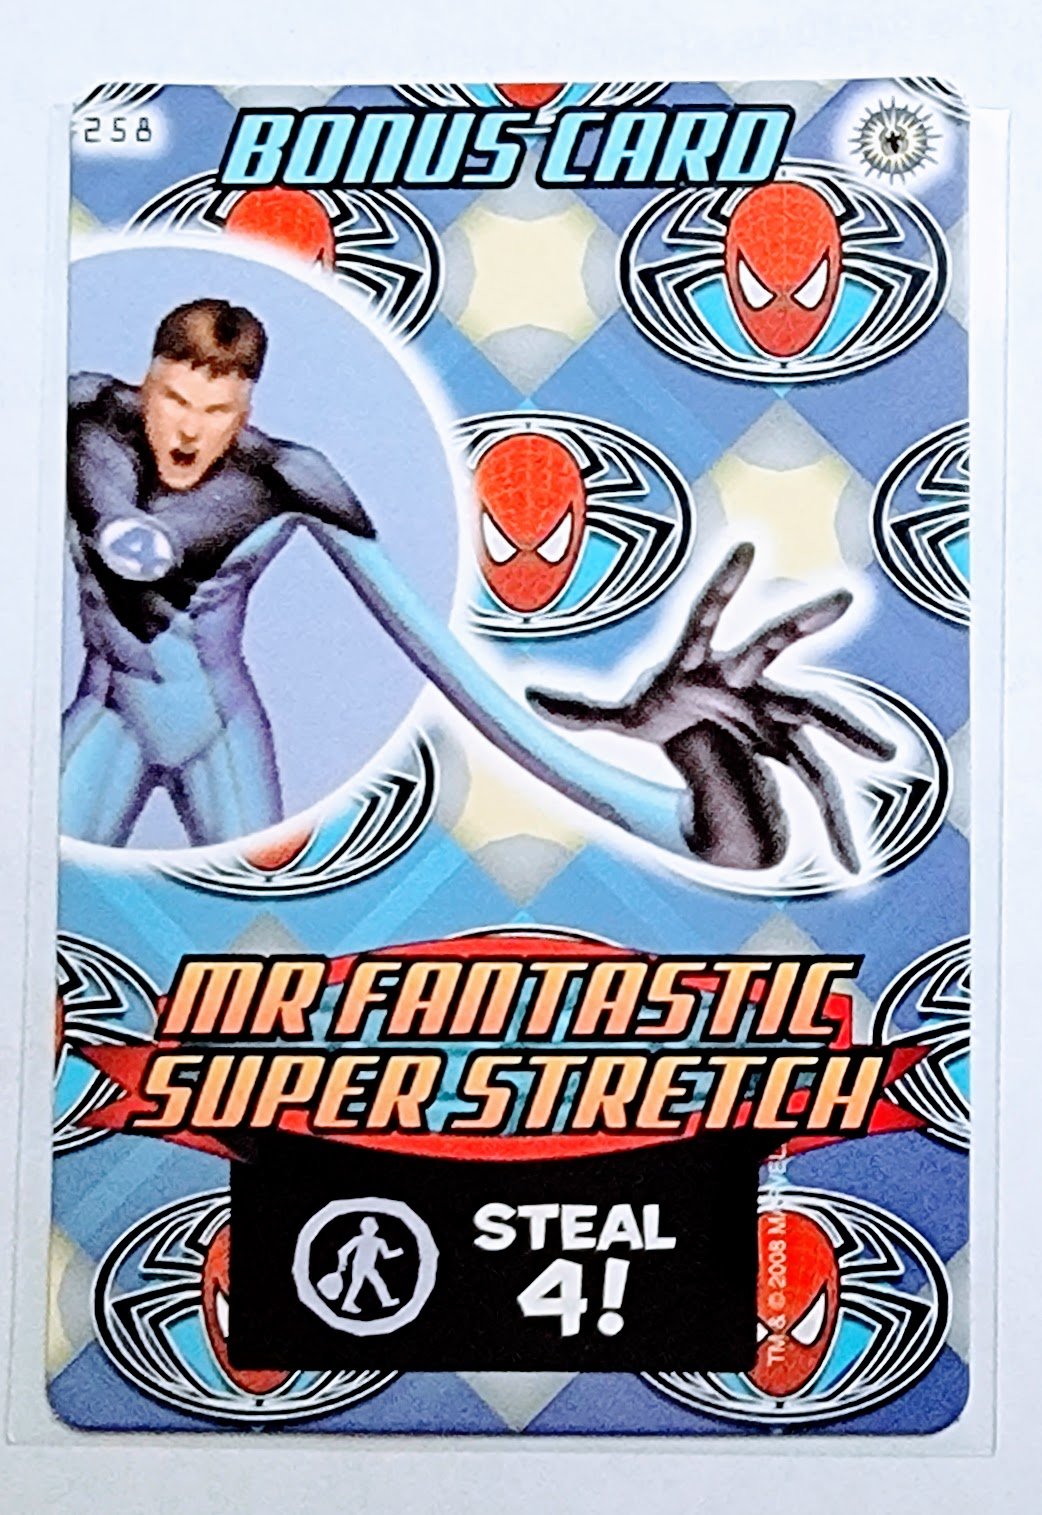 2008 Spiderman Heroes and Villains Mr Fantastic Super Stretch Bonus Card #258 Marvel Booster Trading Card UPTI simple Xclusive Collectibles   